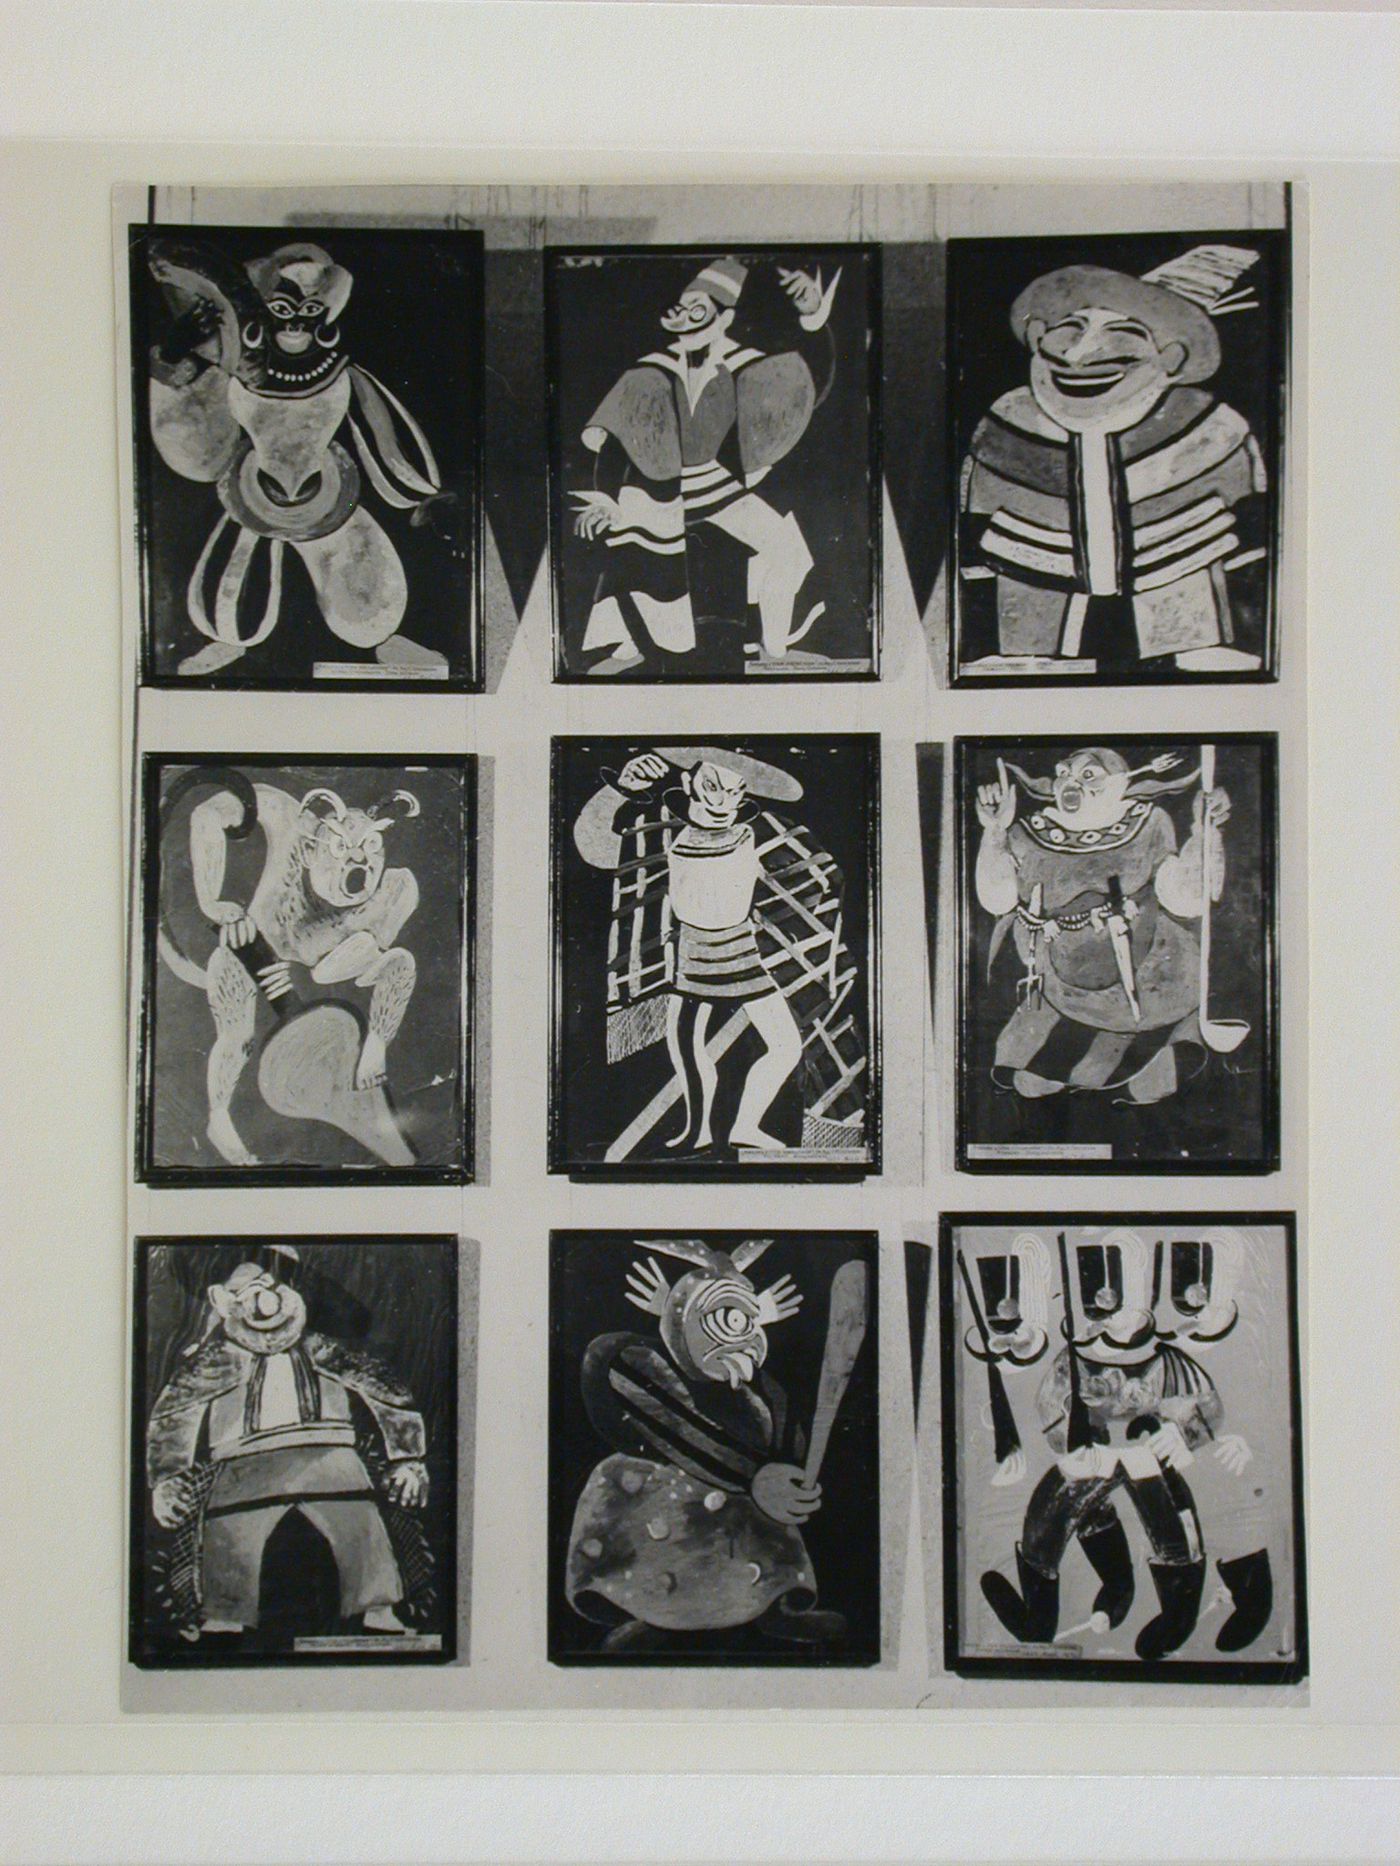 Photograph of nine costume designs by I. Rabinovich [?] for the opera "Love for Three Oranges" by Sergei Prokof'ev, Soviet Union (now in Russia ?)